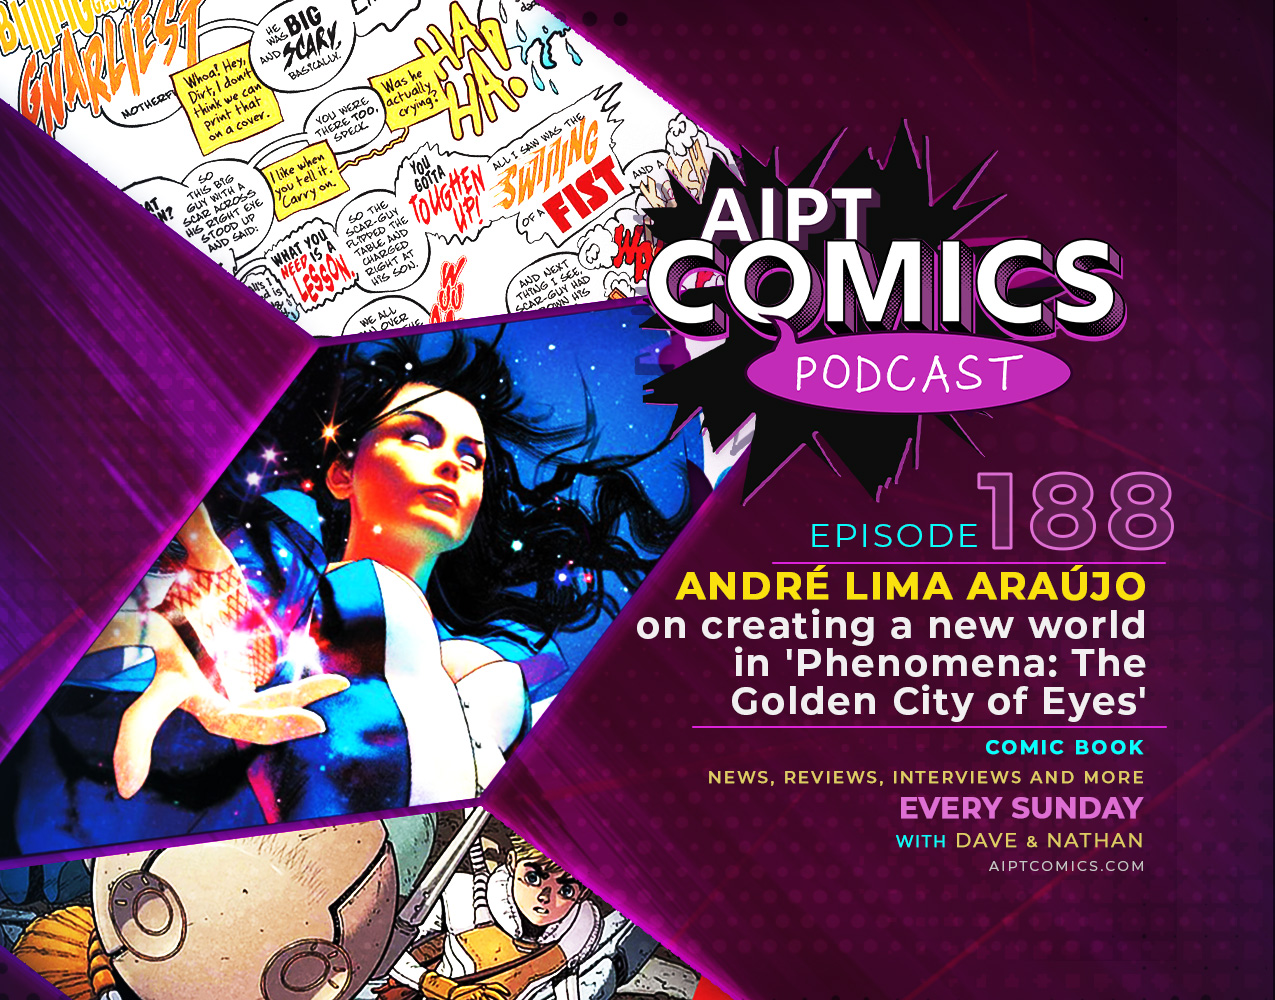 AIPT Comics Podcast Episode 188: André Lima Araújo on creating a new world in 'Phenomena: The Golden City of Eyes'